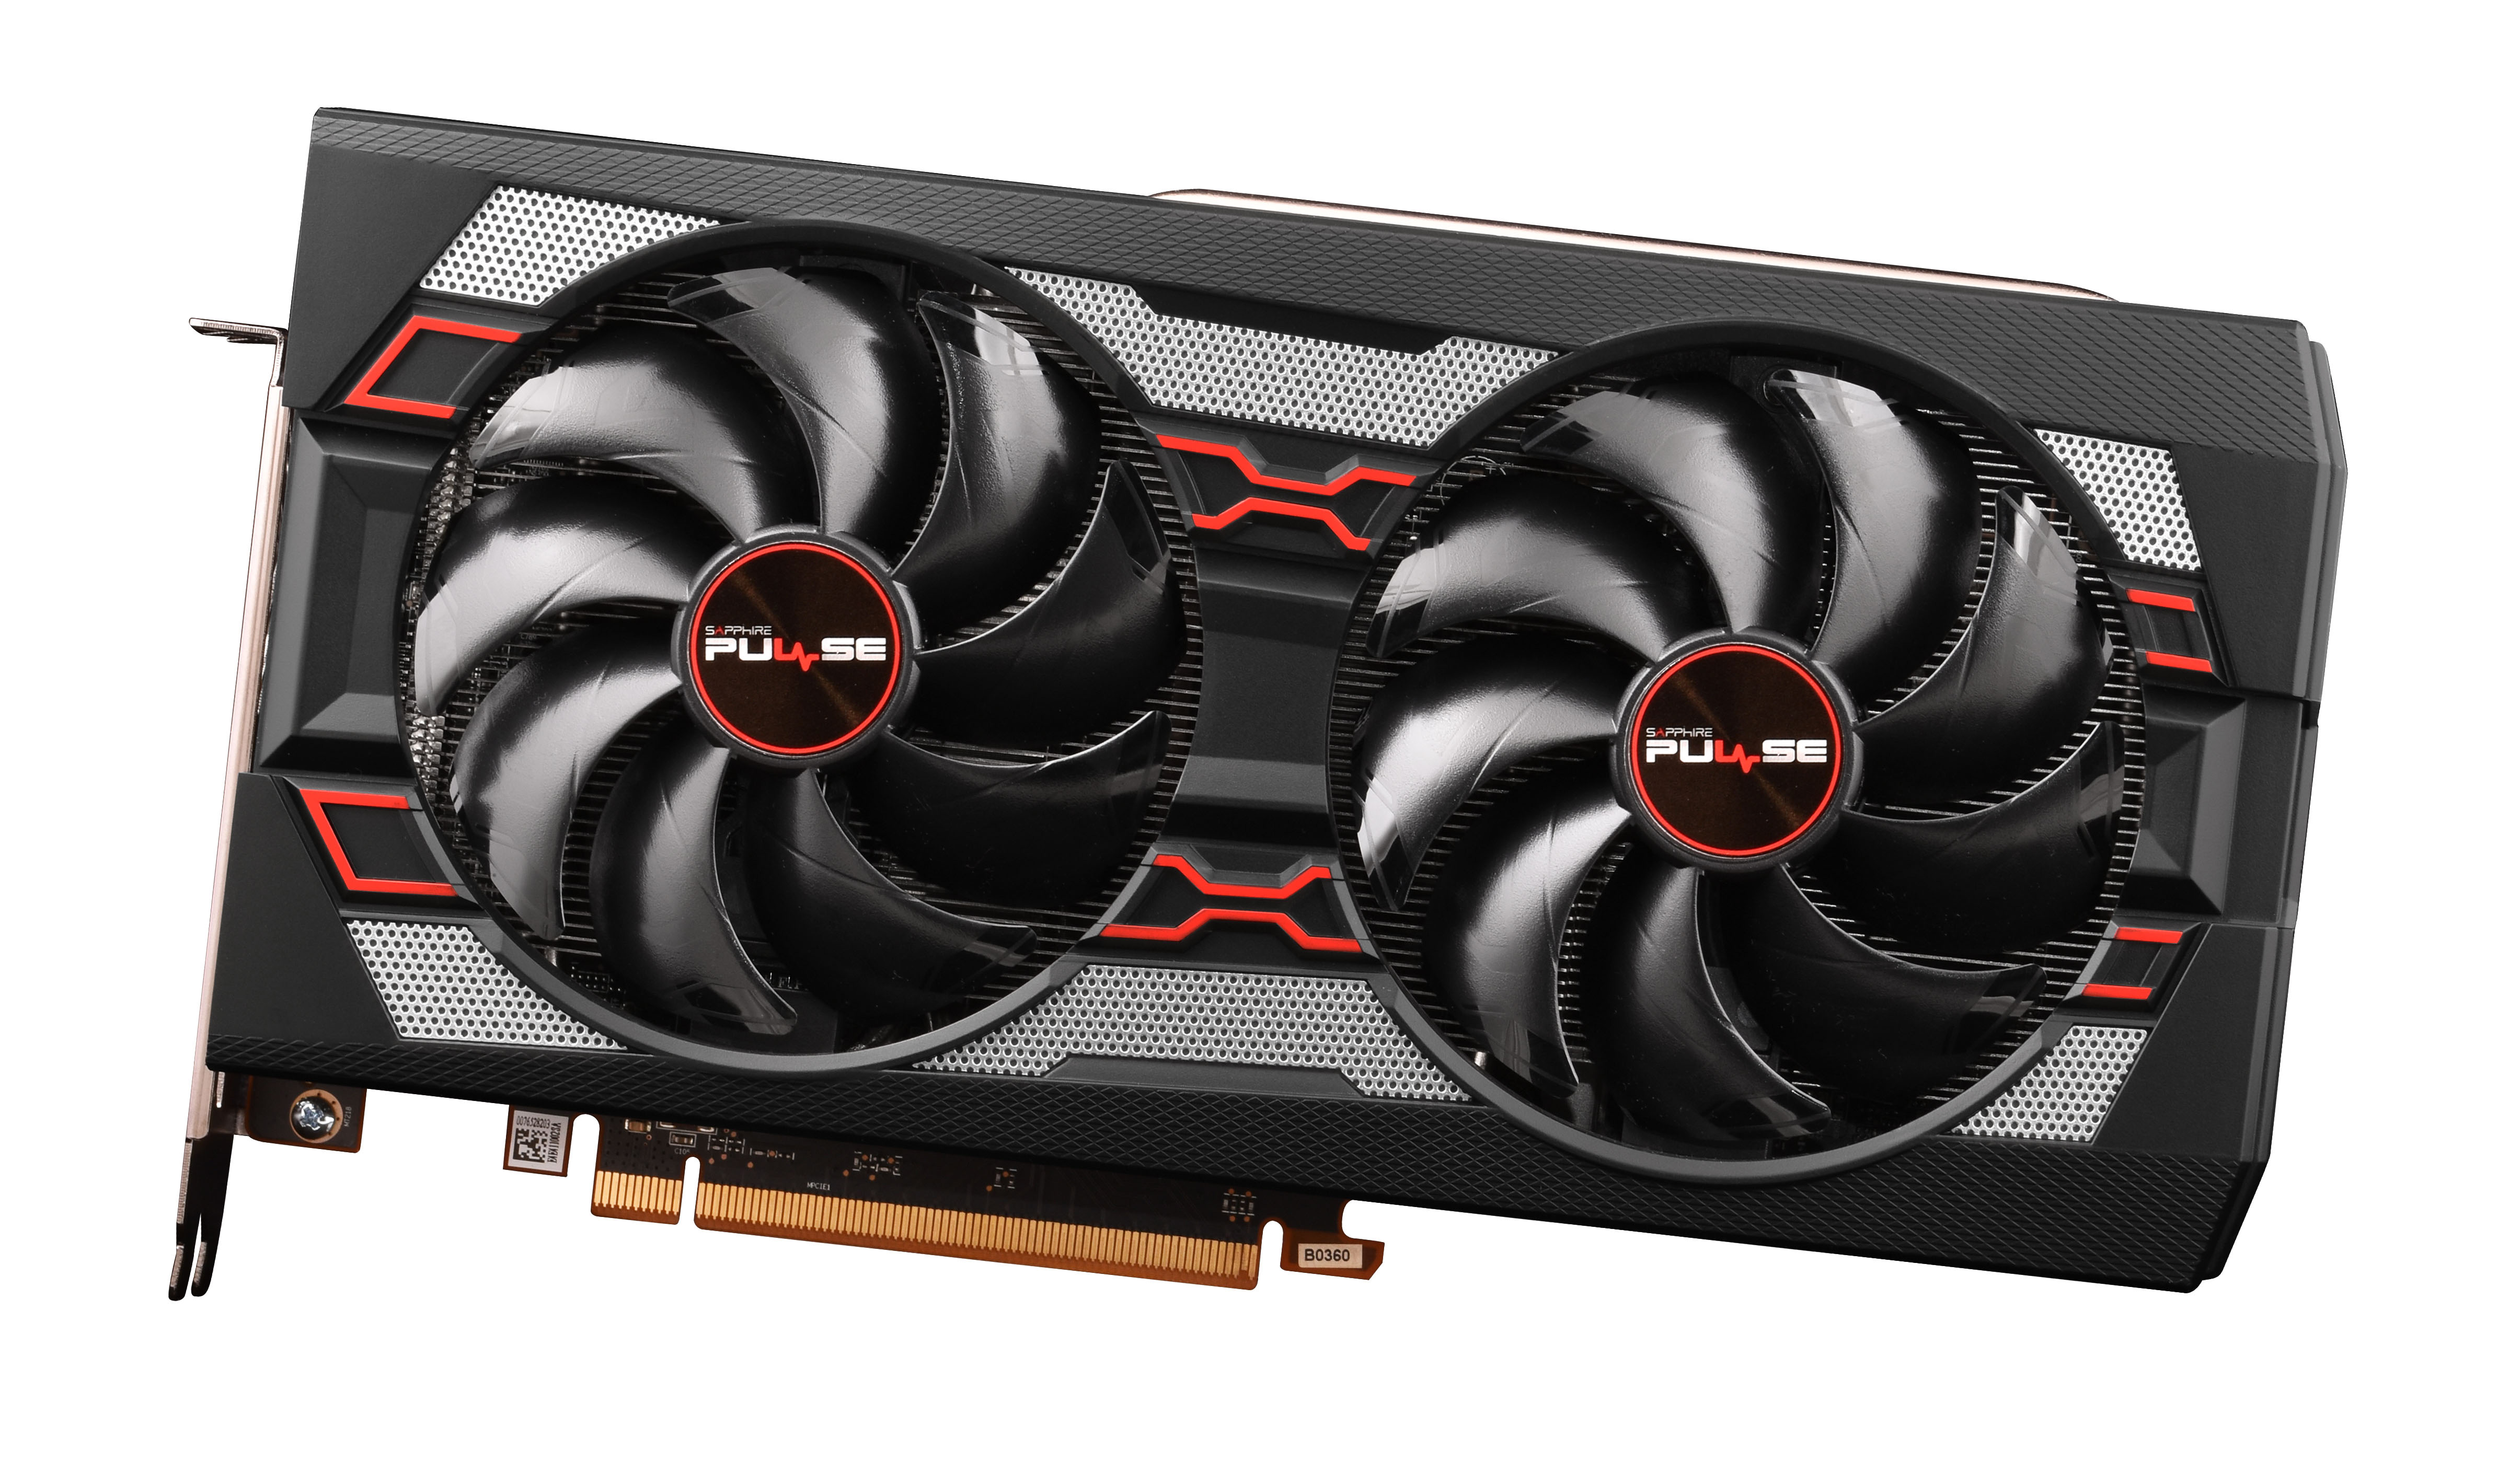 Konserveringsmiddel silke invadere Closing Thoughts - The AMD Radeon RX 5600 XT Review, Feat. Sapphire Pulse:  A New Challenger For Mainstream Gaming